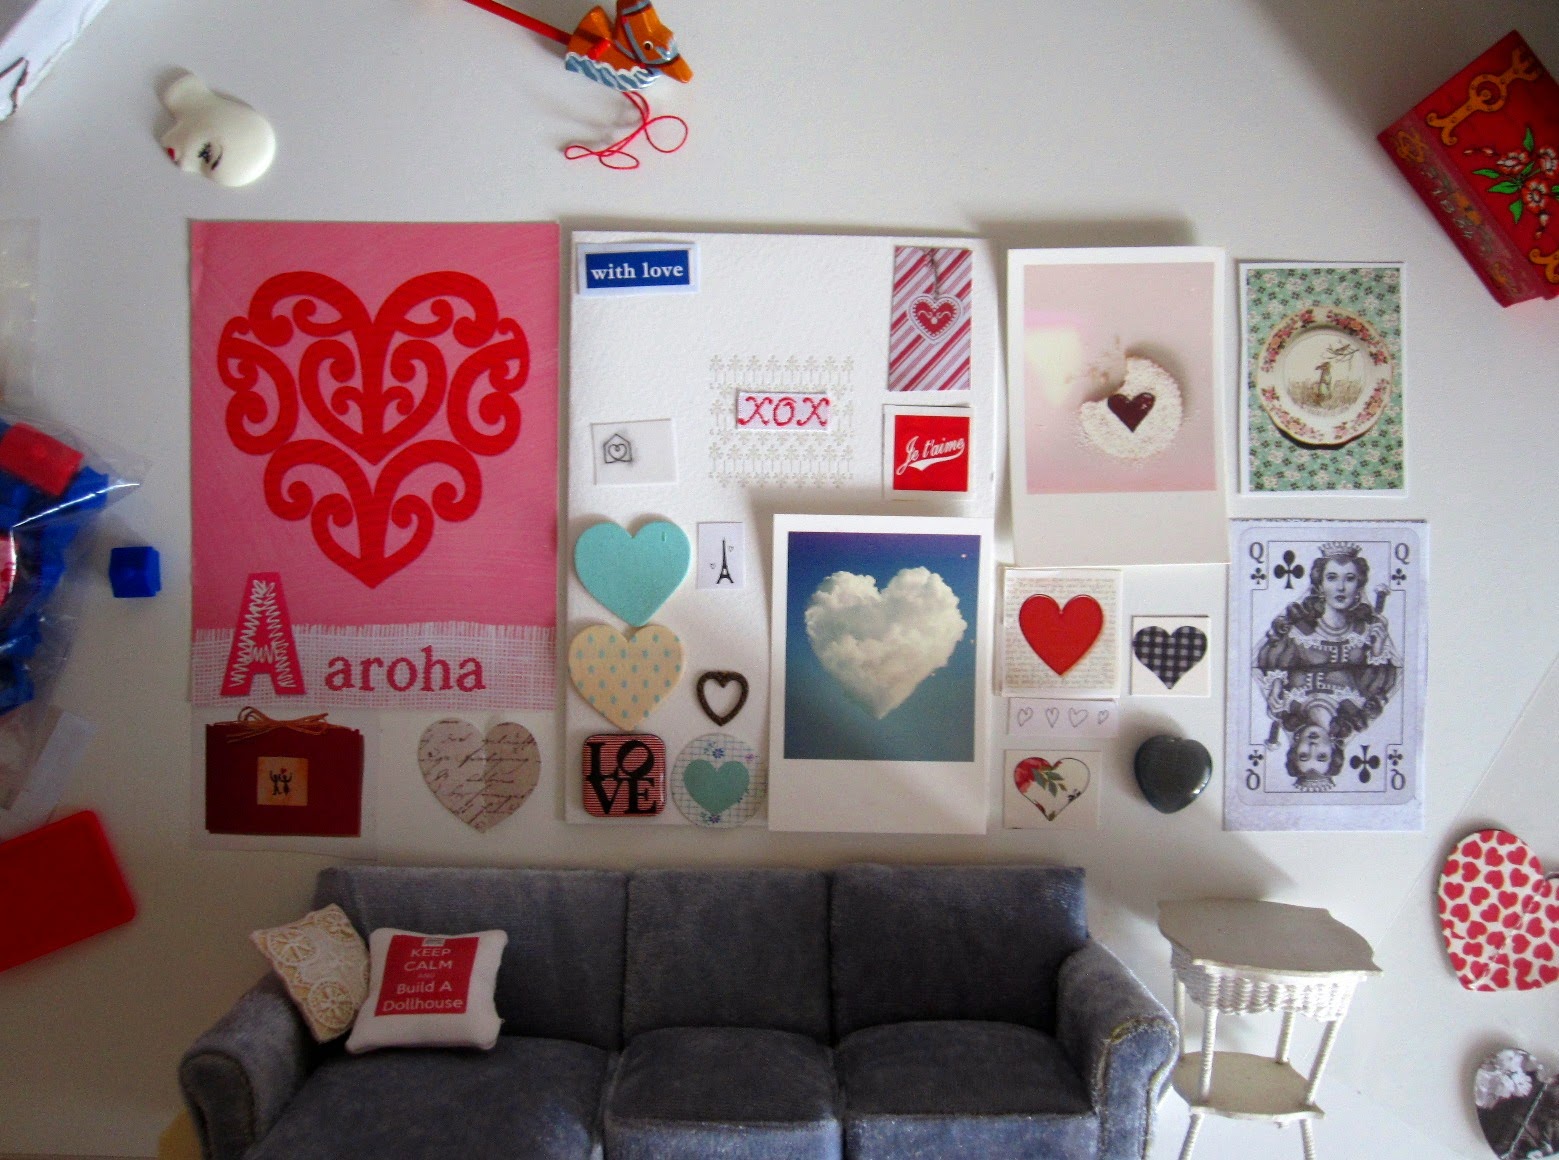 Modern dolls' house miniature grey sectional sofa and cane table with a selection of heart-themed images arranged 'above' them on a wall (actually a desk, with the dolls' house furniture tuned sideways).